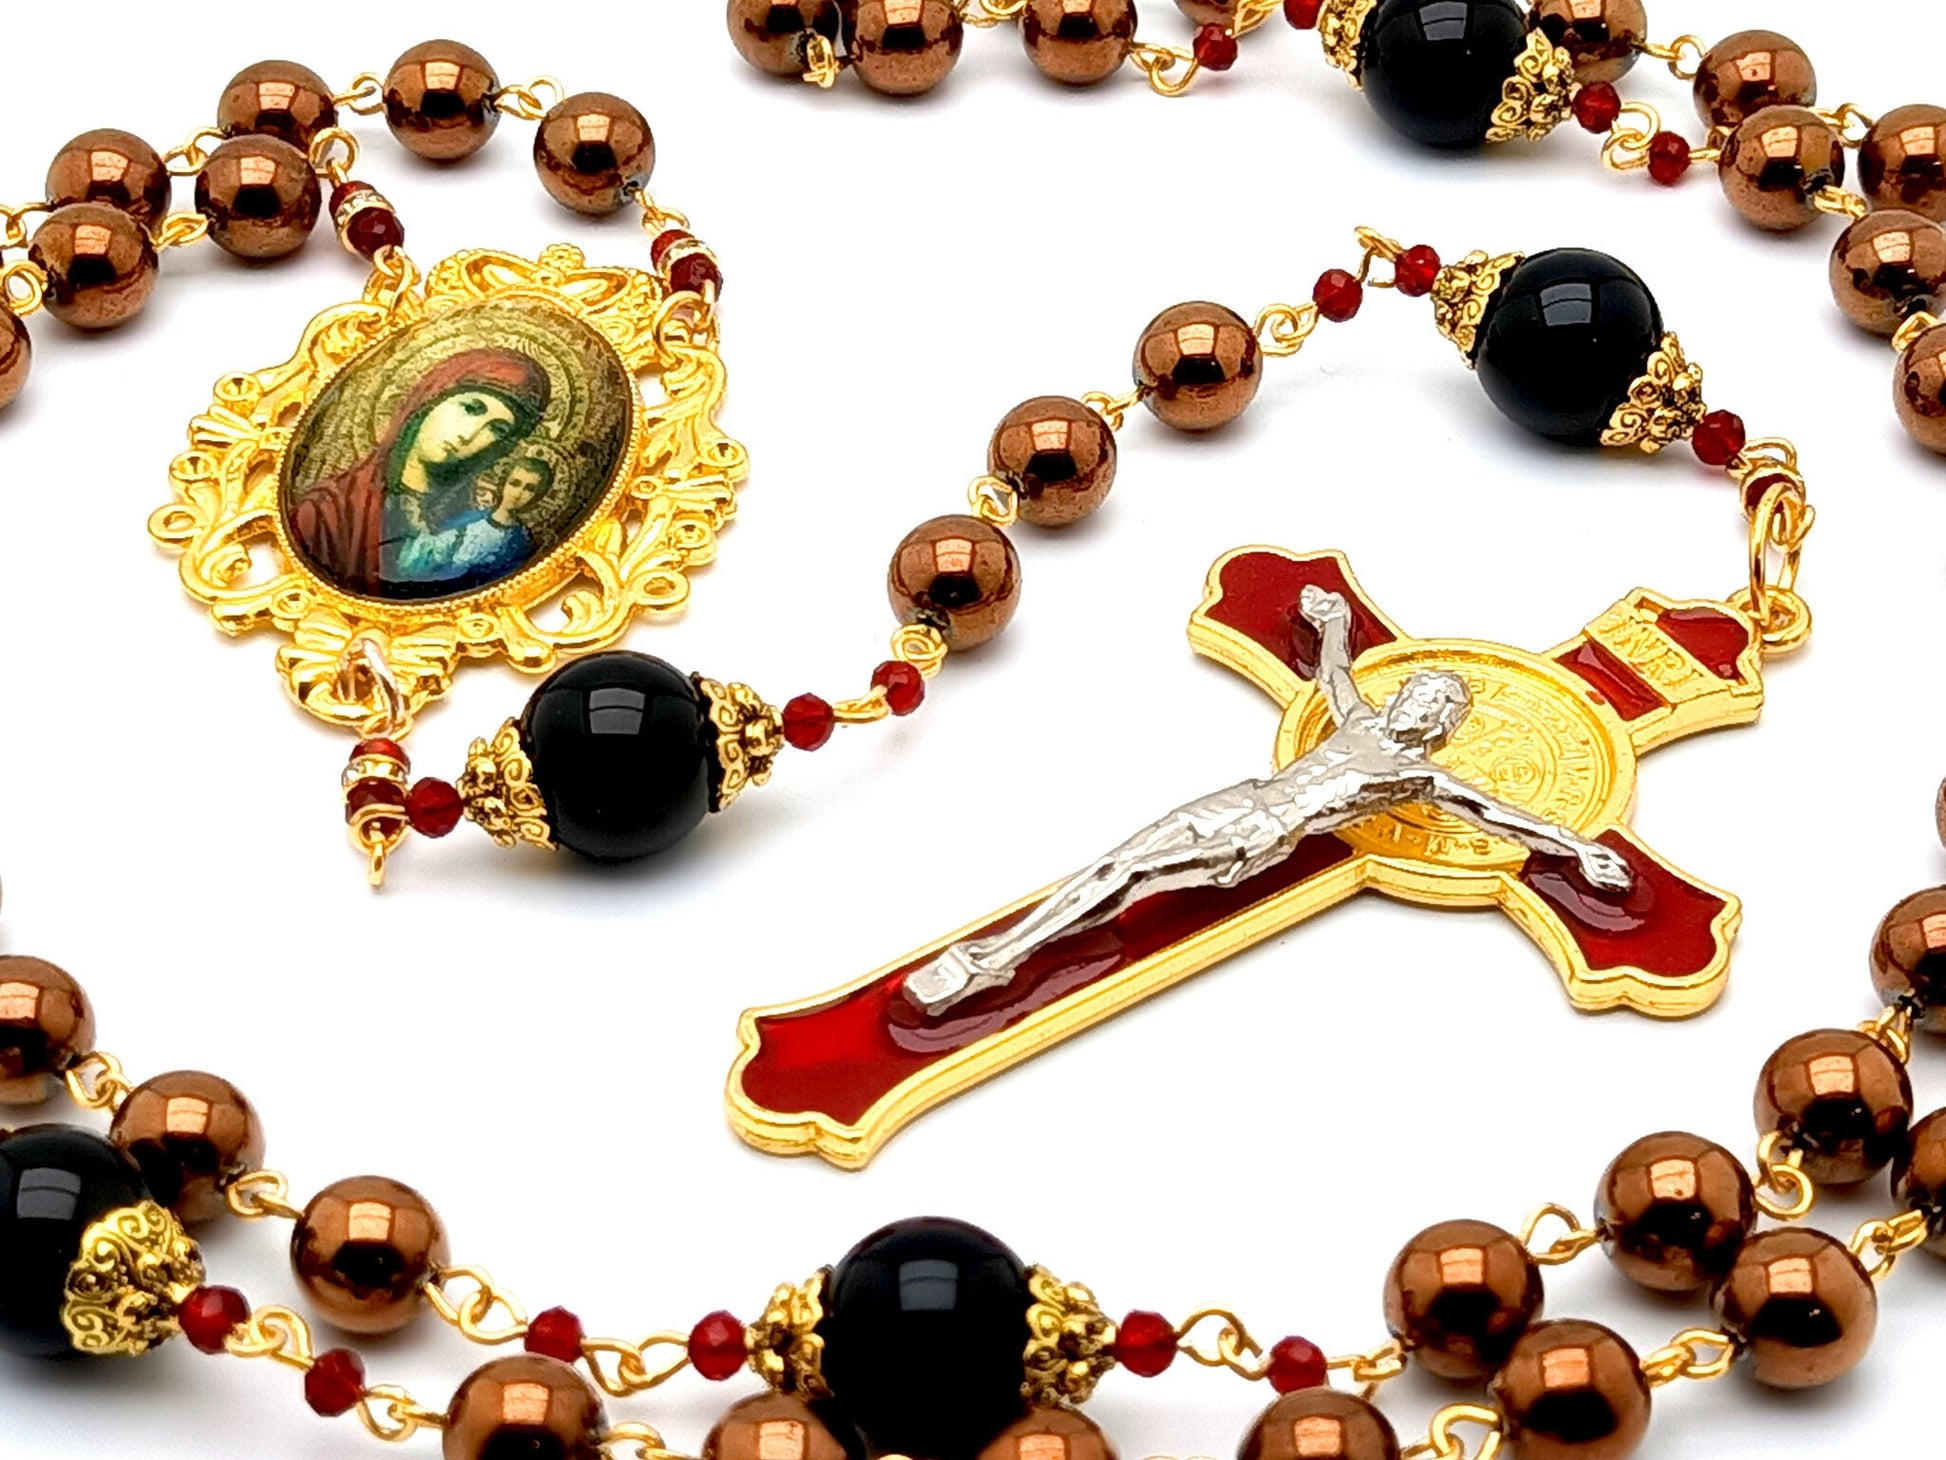 Our Lady of Perpetual Help unique rosary beads with hematite and onyx gemstone beads and red and gold enamel Saint Benedict crucifix.